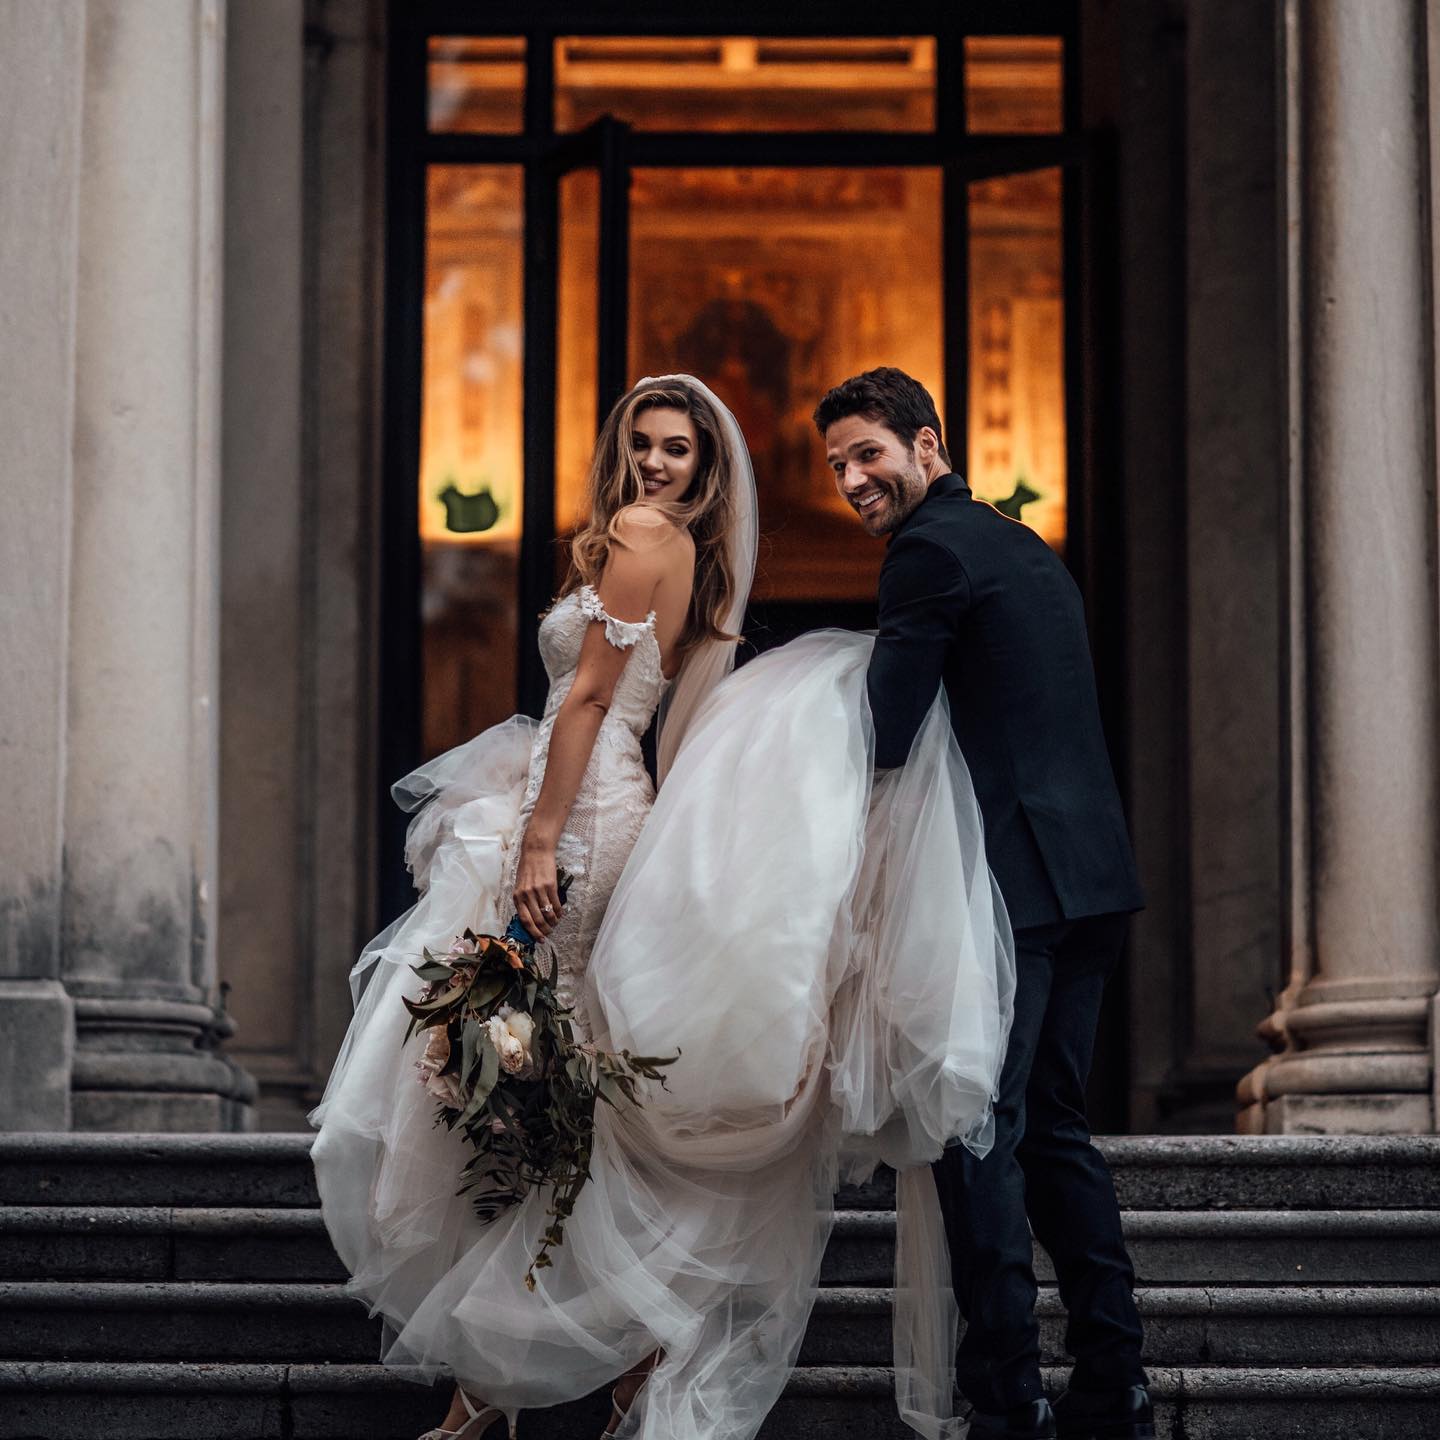 Aaron O'Connell with his wife, Natalie Pack, during their wedding photoshoot